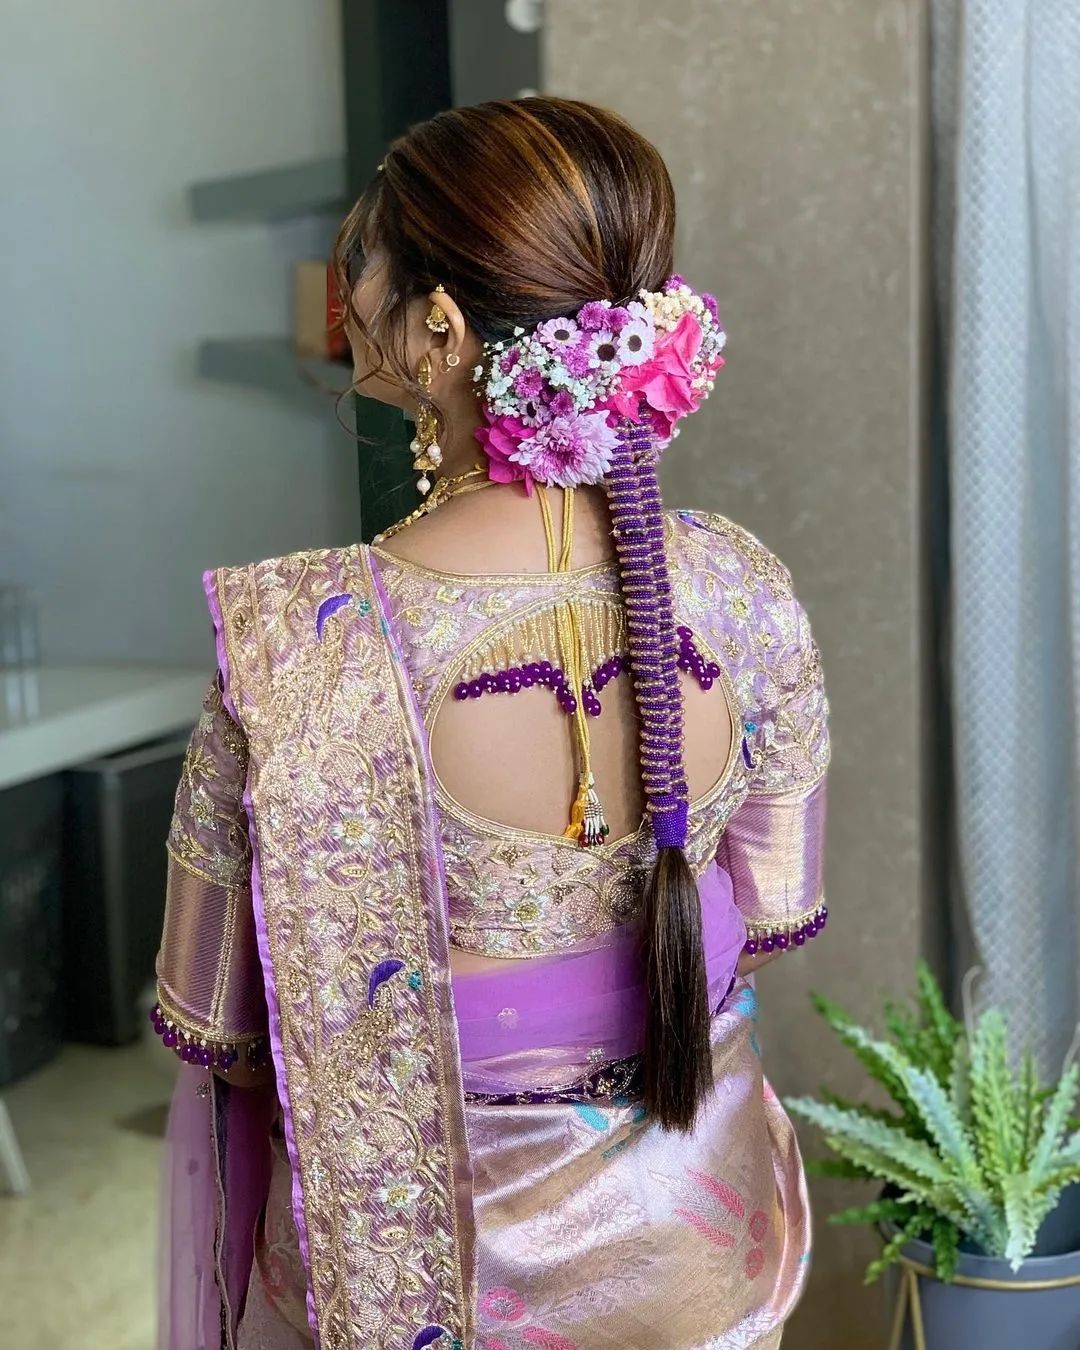 Anila Joseph | Kerala Wedding Hairstyle. Usually the preferred bridal  hairstyle is a braid decorated with fresh jasmine flowers for hindu brides.  For d... | Instagram